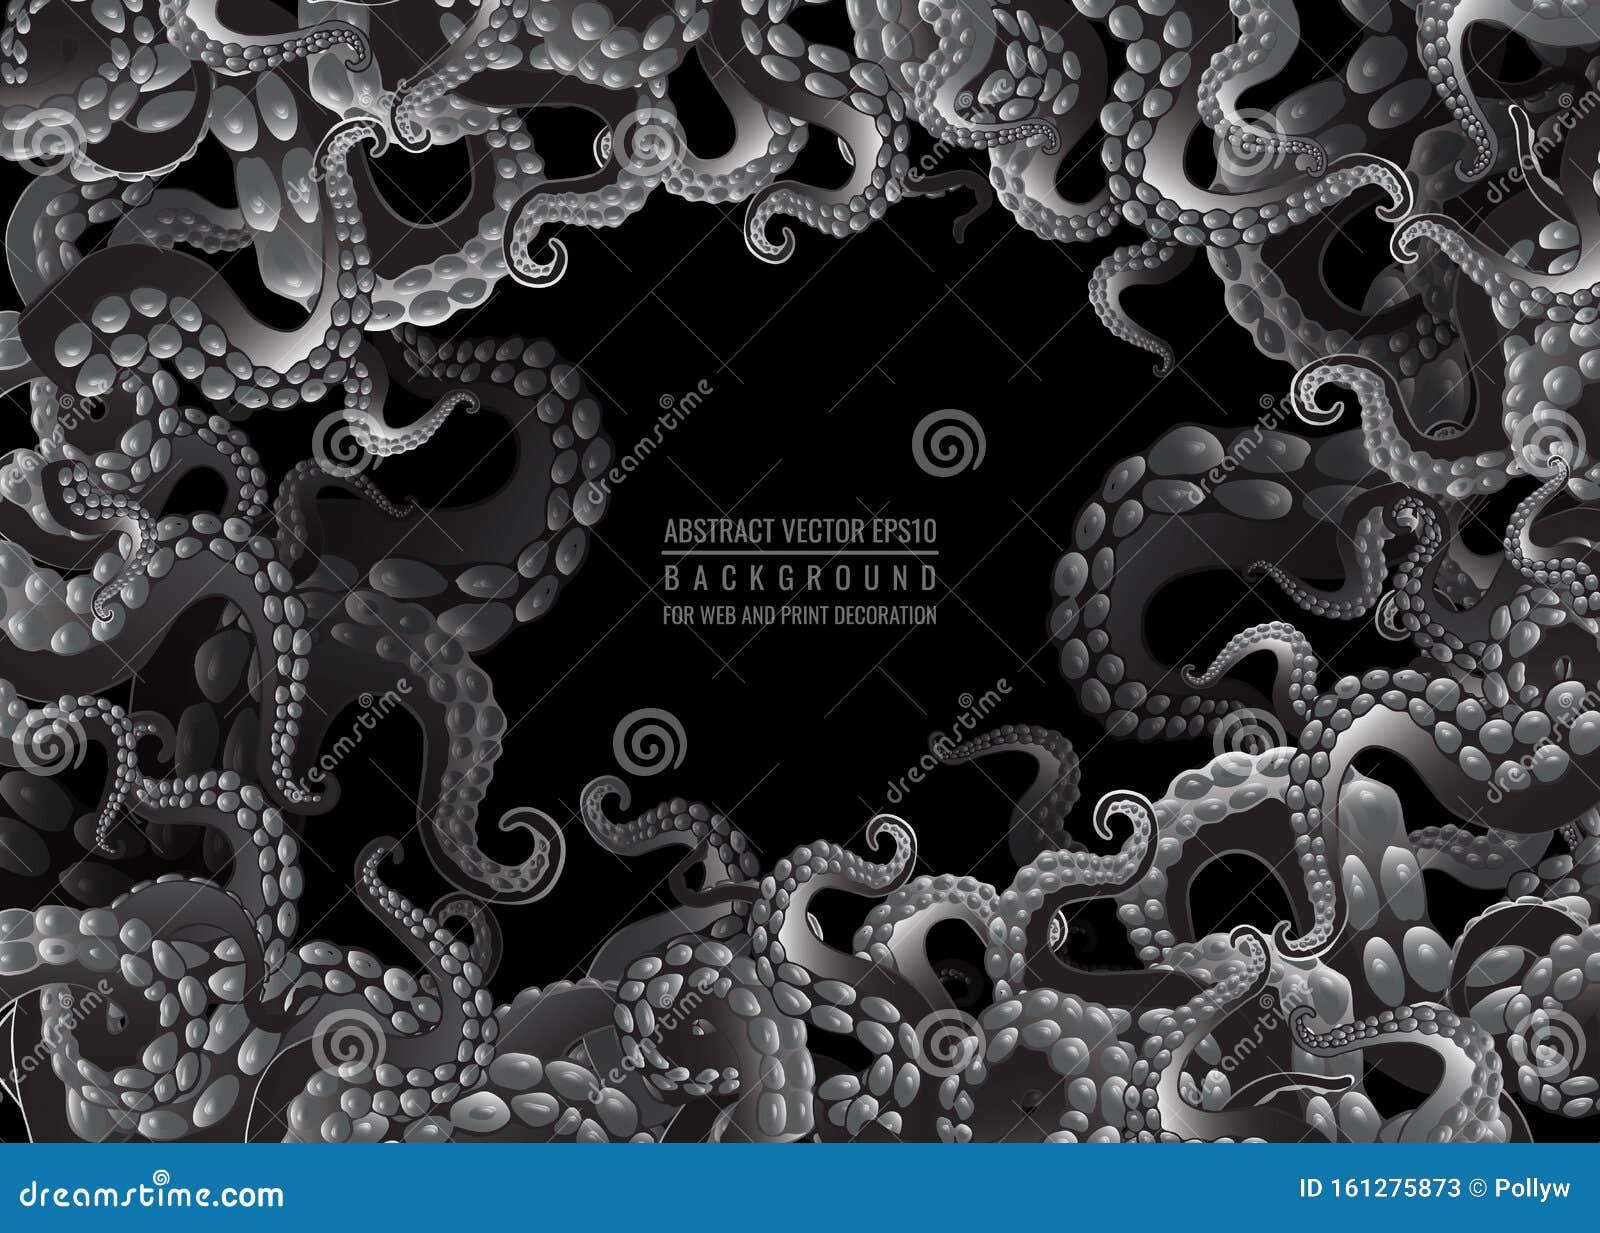 futuristic background with black and white tentacles of an octopus frame